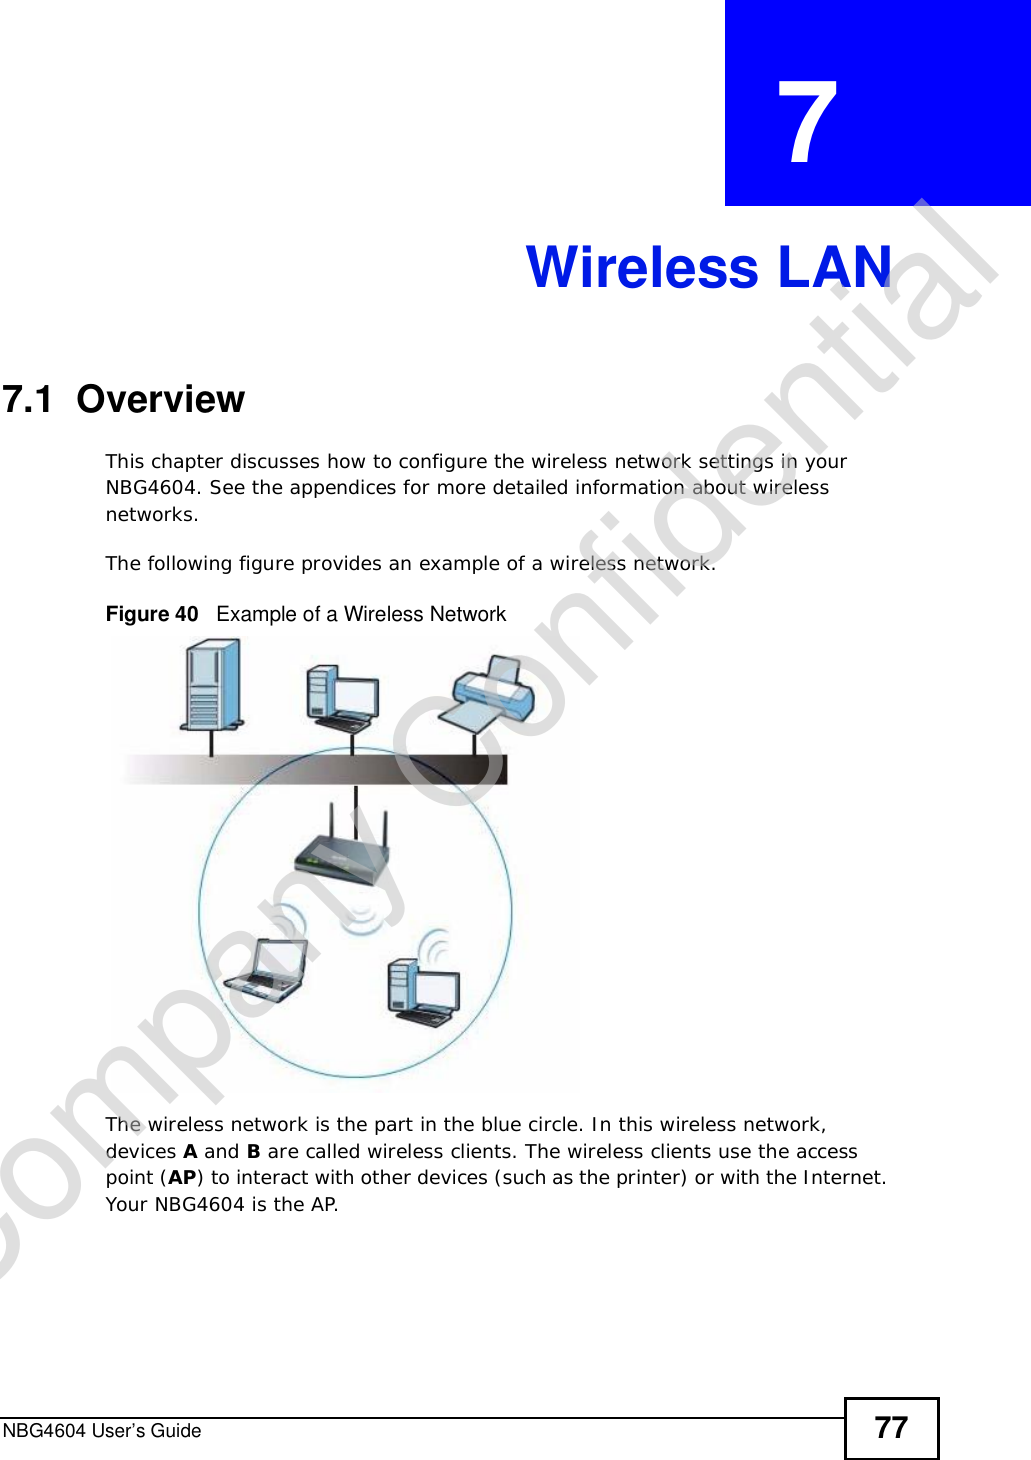 NBG4604 User’s Guide 77CHAPTER  7 Wireless LAN7.1  OverviewThis chapter discusses how to configure the wireless network settings in your NBG4604. See the appendices for more detailed information about wireless networks.The following figure provides an example of a wireless network.Figure 40   Example of a Wireless NetworkThe wireless network is the part in the blue circle. In this wireless network, devices A and B are called wireless clients. The wireless clients use the access point (AP) to interact with other devices (such as the printer) or with the Internet. Your NBG4604 is the AP.Company Confidential